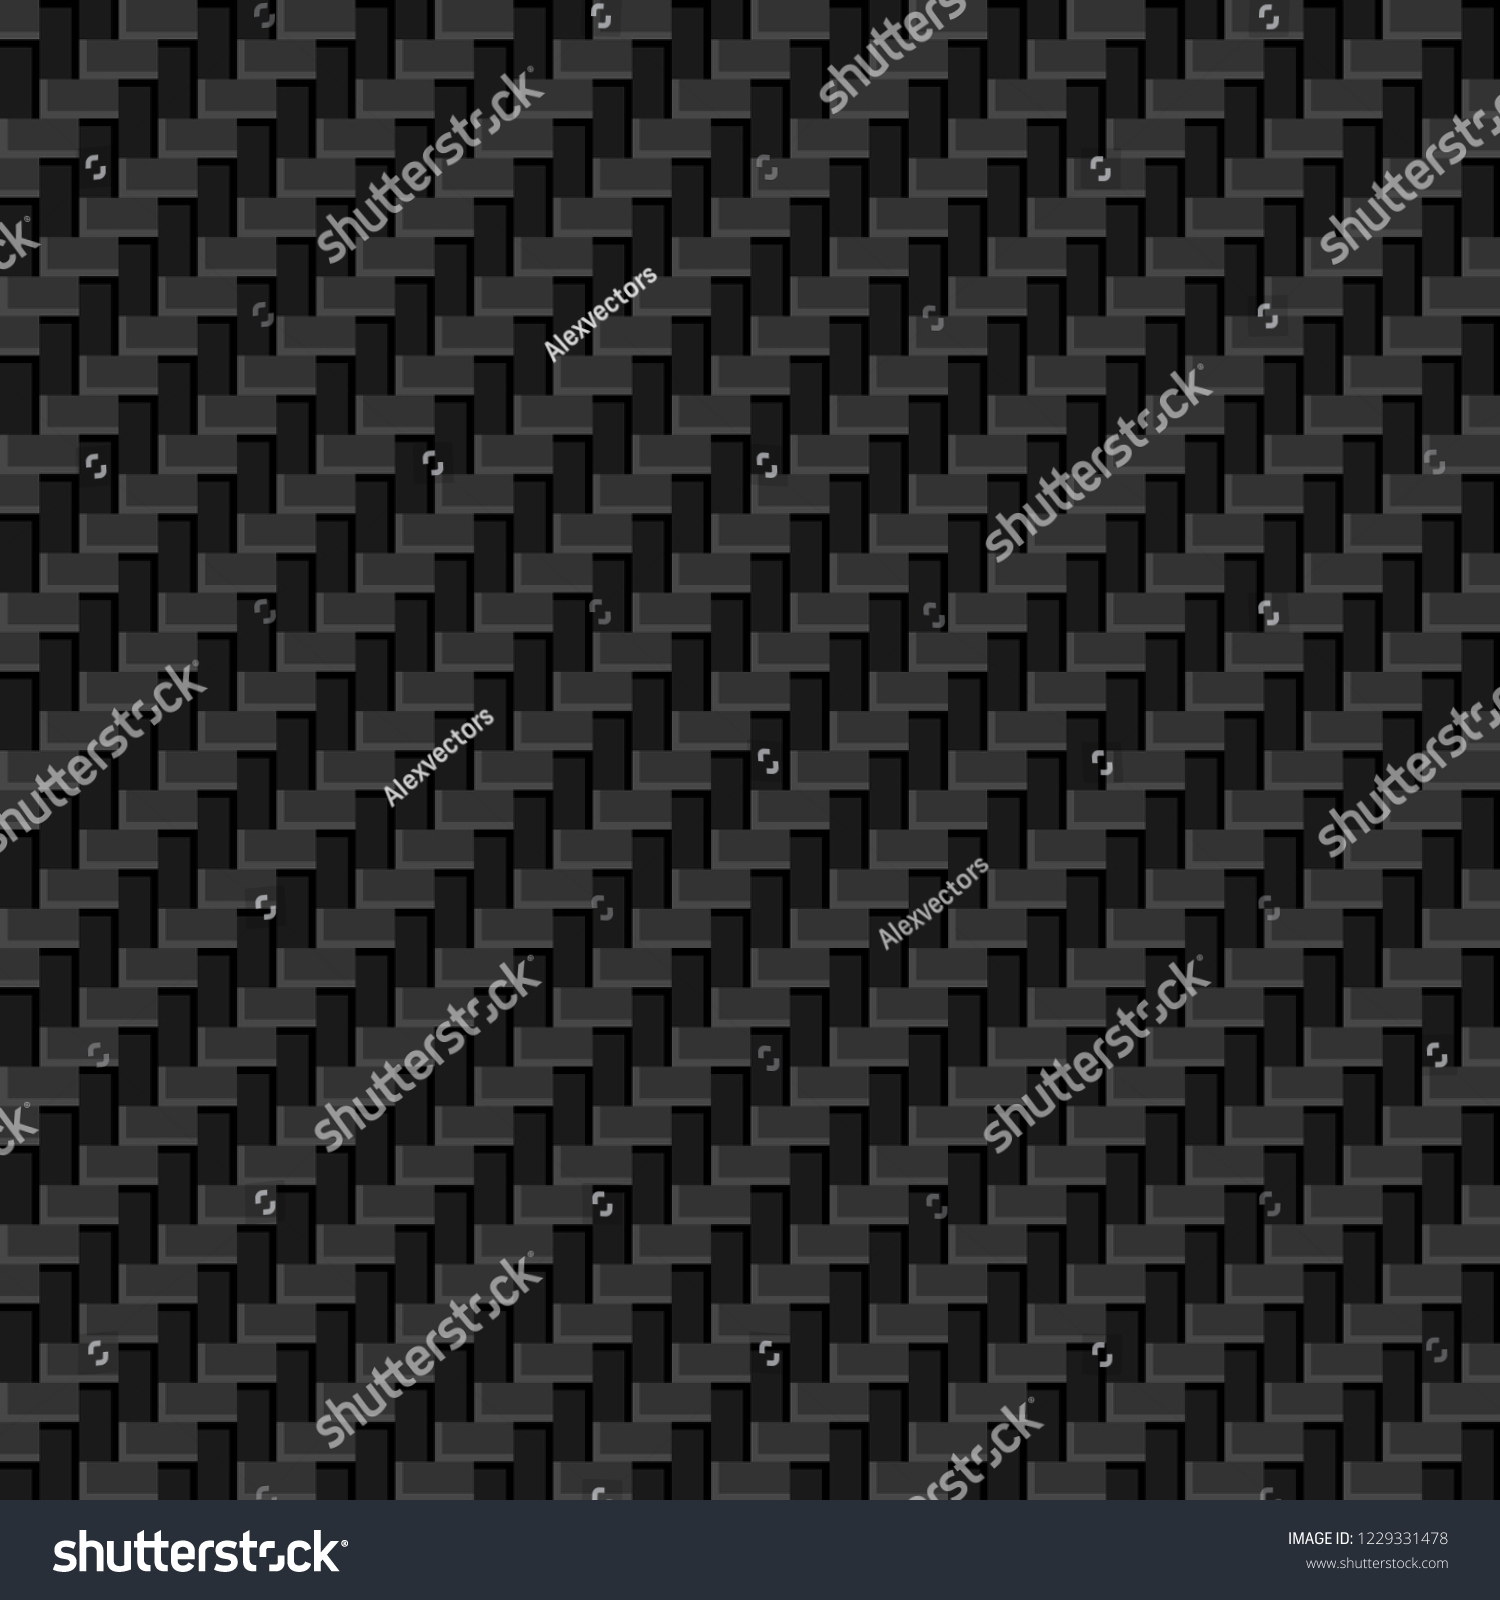 SVG of Seamless pattern with carbon weave texture. Abstract modern geometric background. Vector illustration. svg